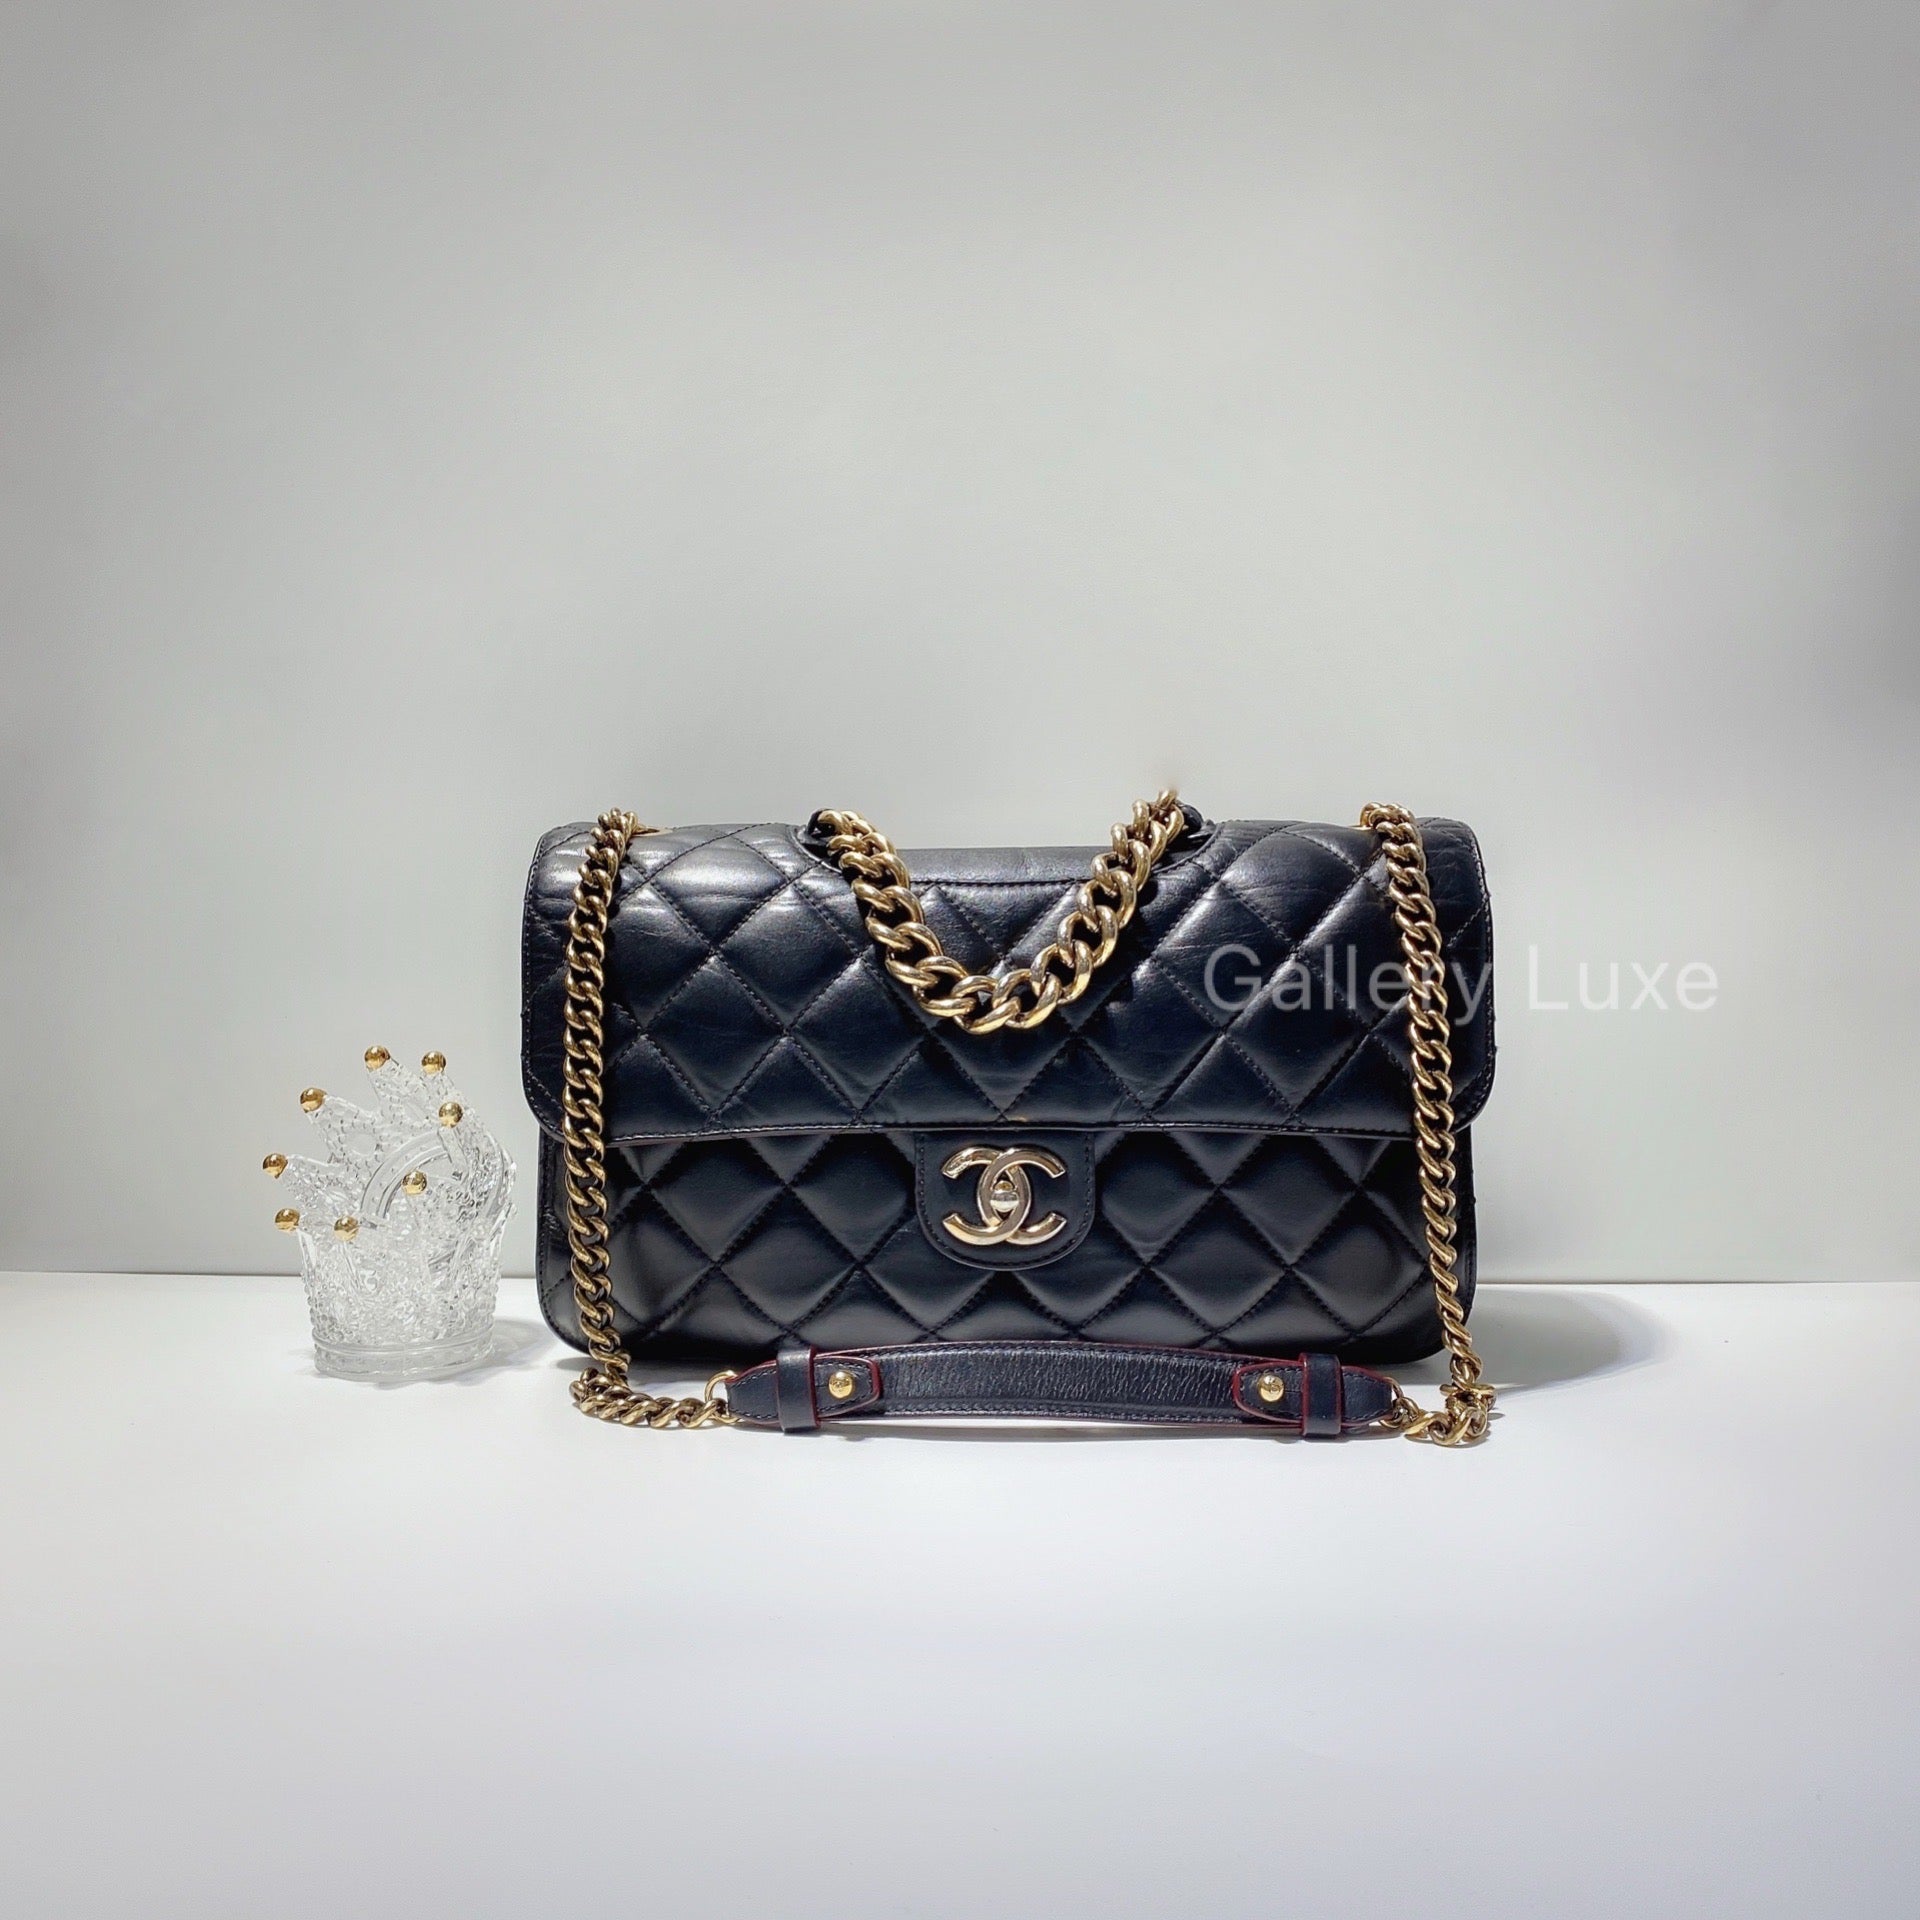 No.2549-Chanel Perfect Edge Flap Bag – Gallery Luxe